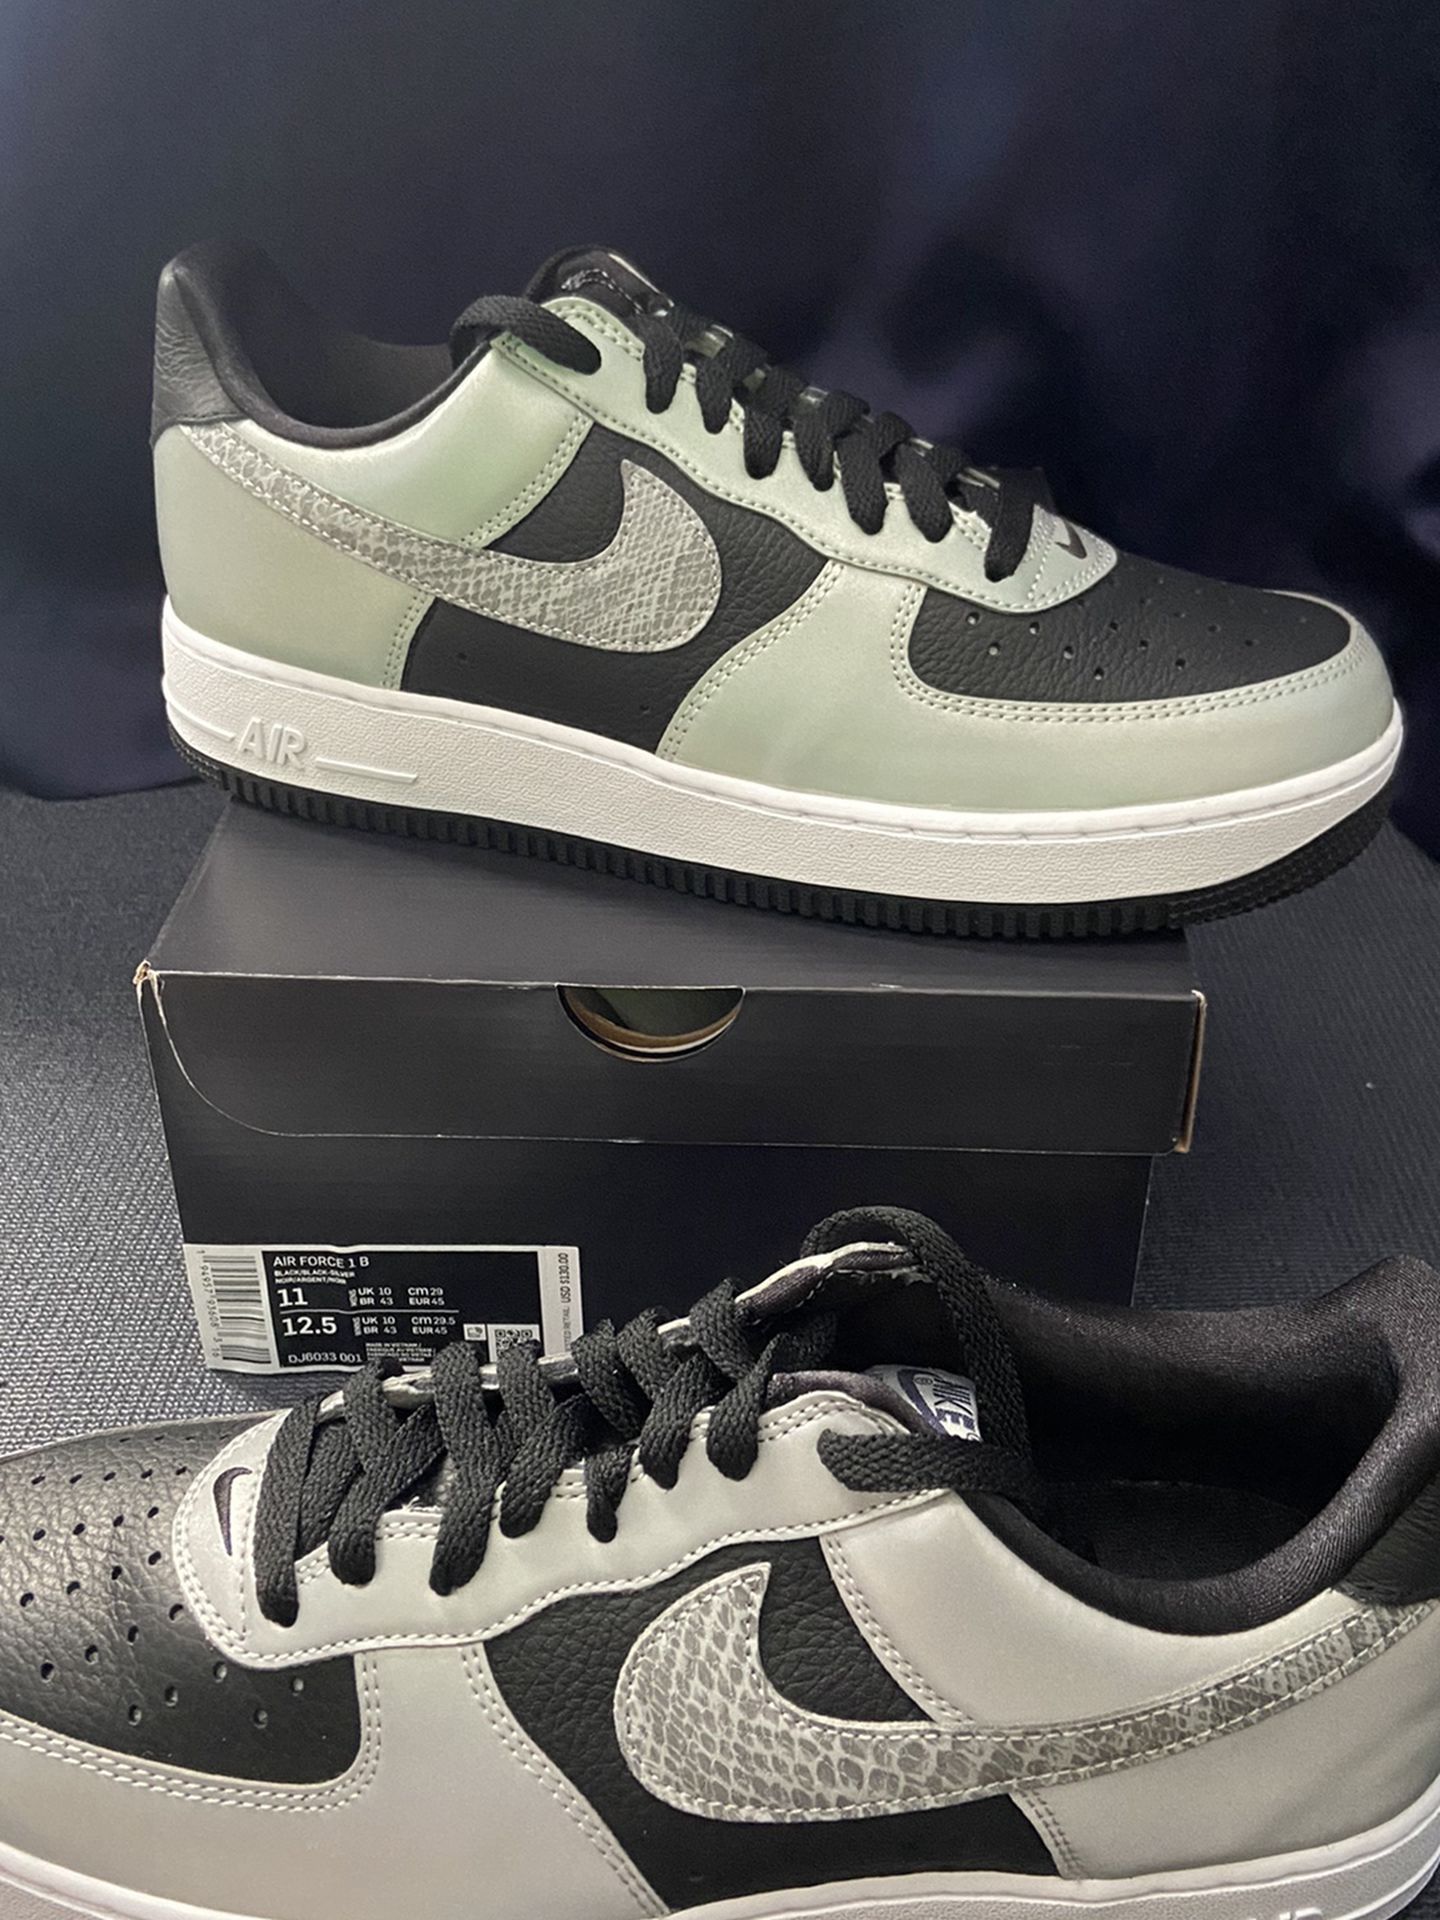 Air Force 1 “Silver Snake” Mens Size 11 & 7.5 Available